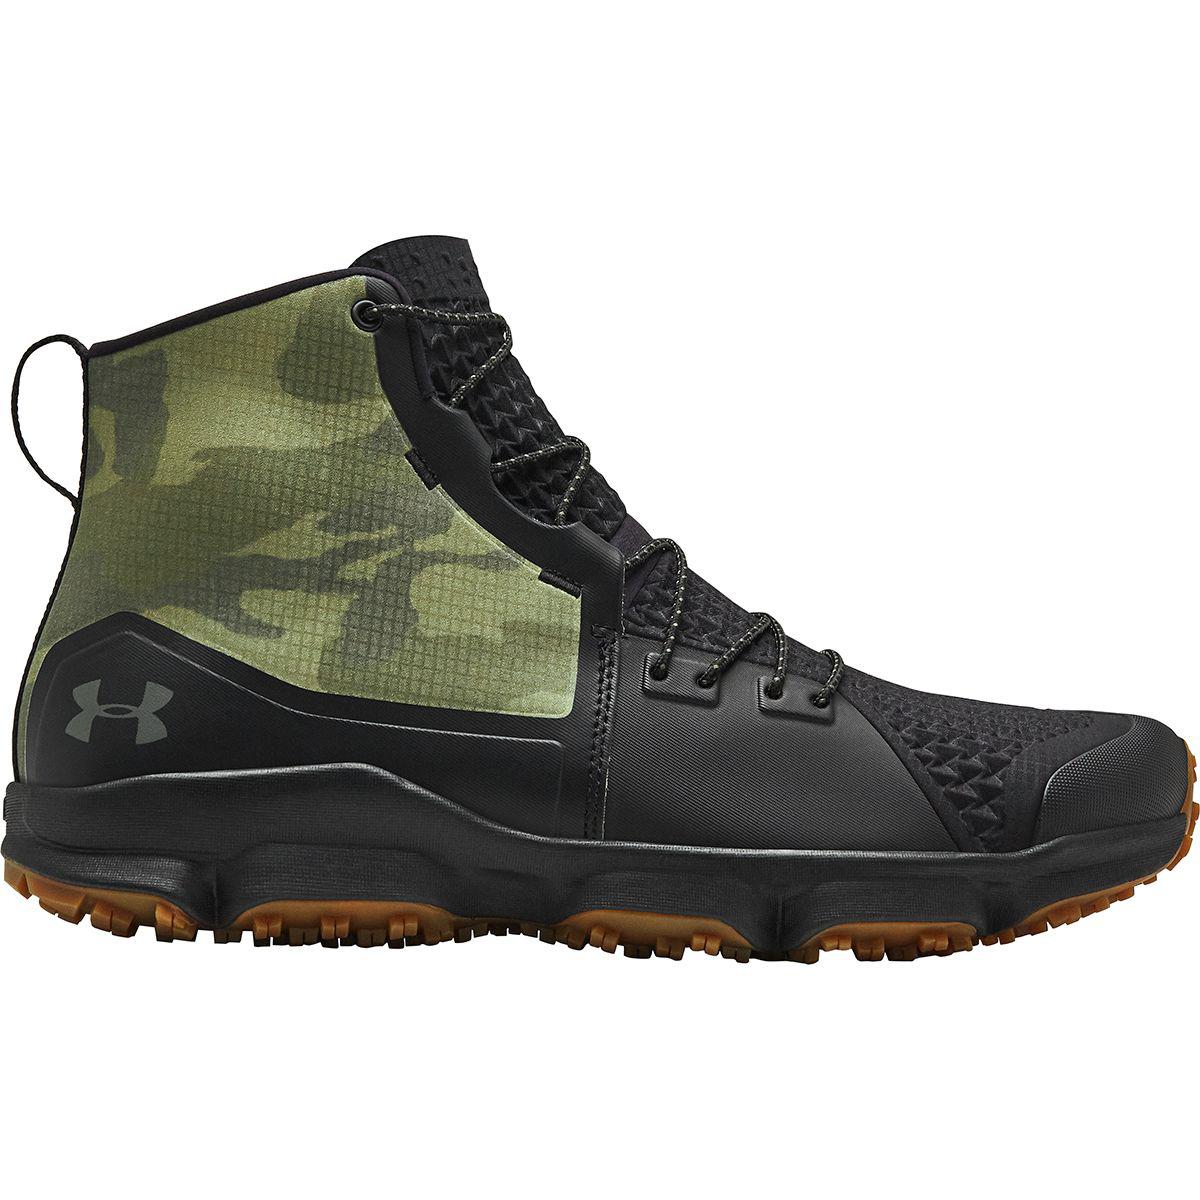 Under Armour Synthetic Speedfit 2.0 Hiking Boot in Black/Black (Black ...